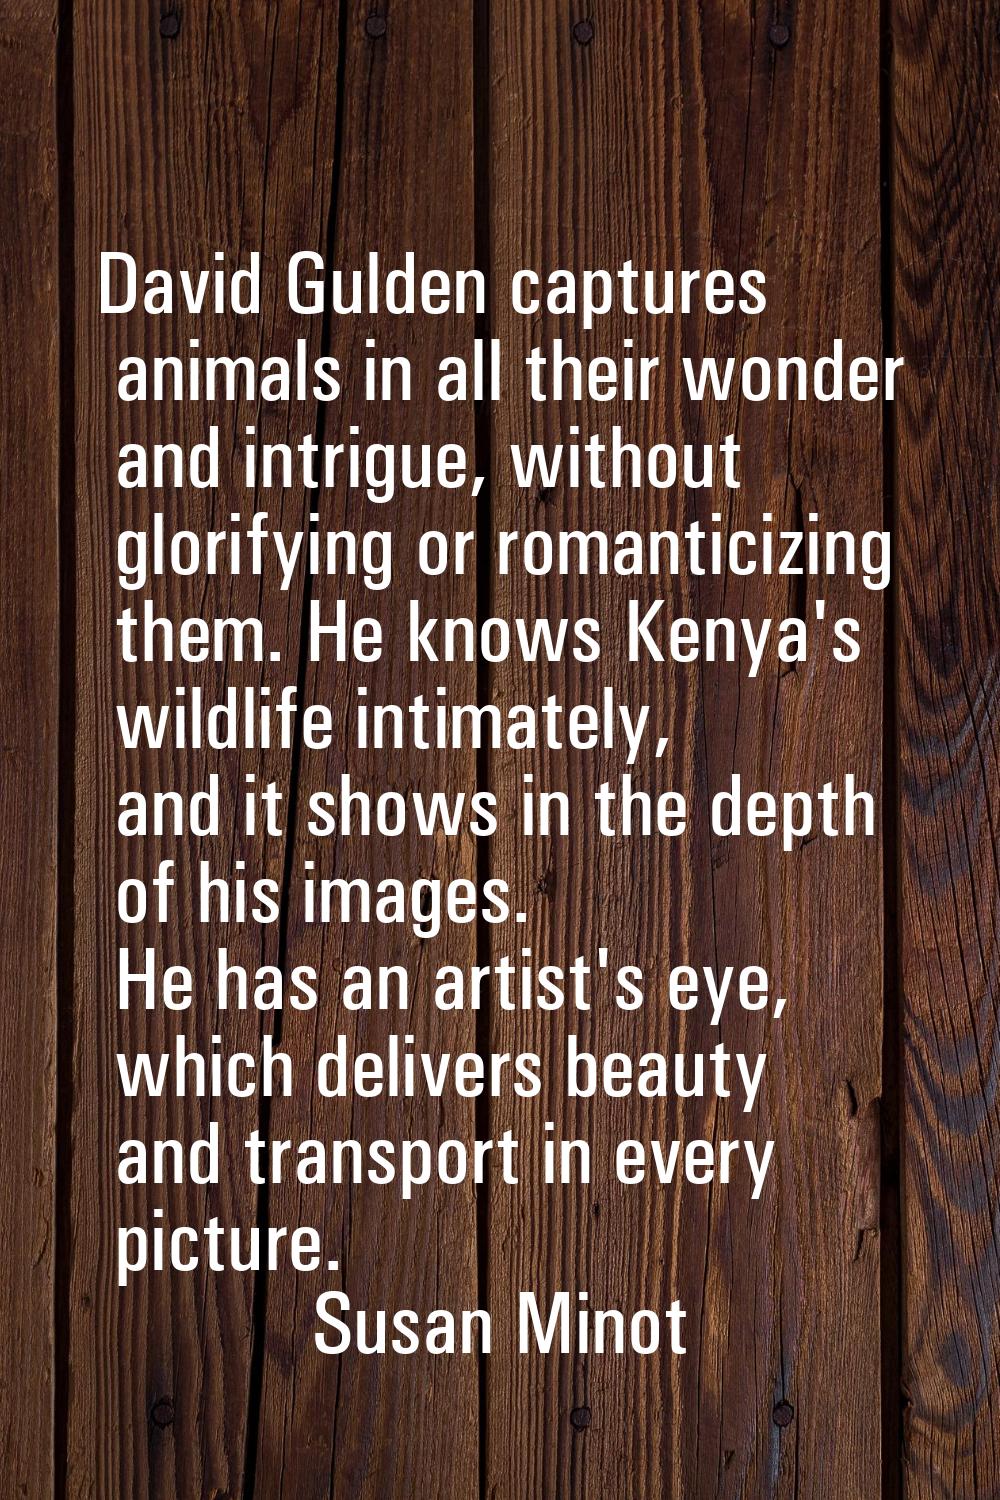 David Gulden captures animals in all their wonder and intrigue, without glorifying or romanticizing